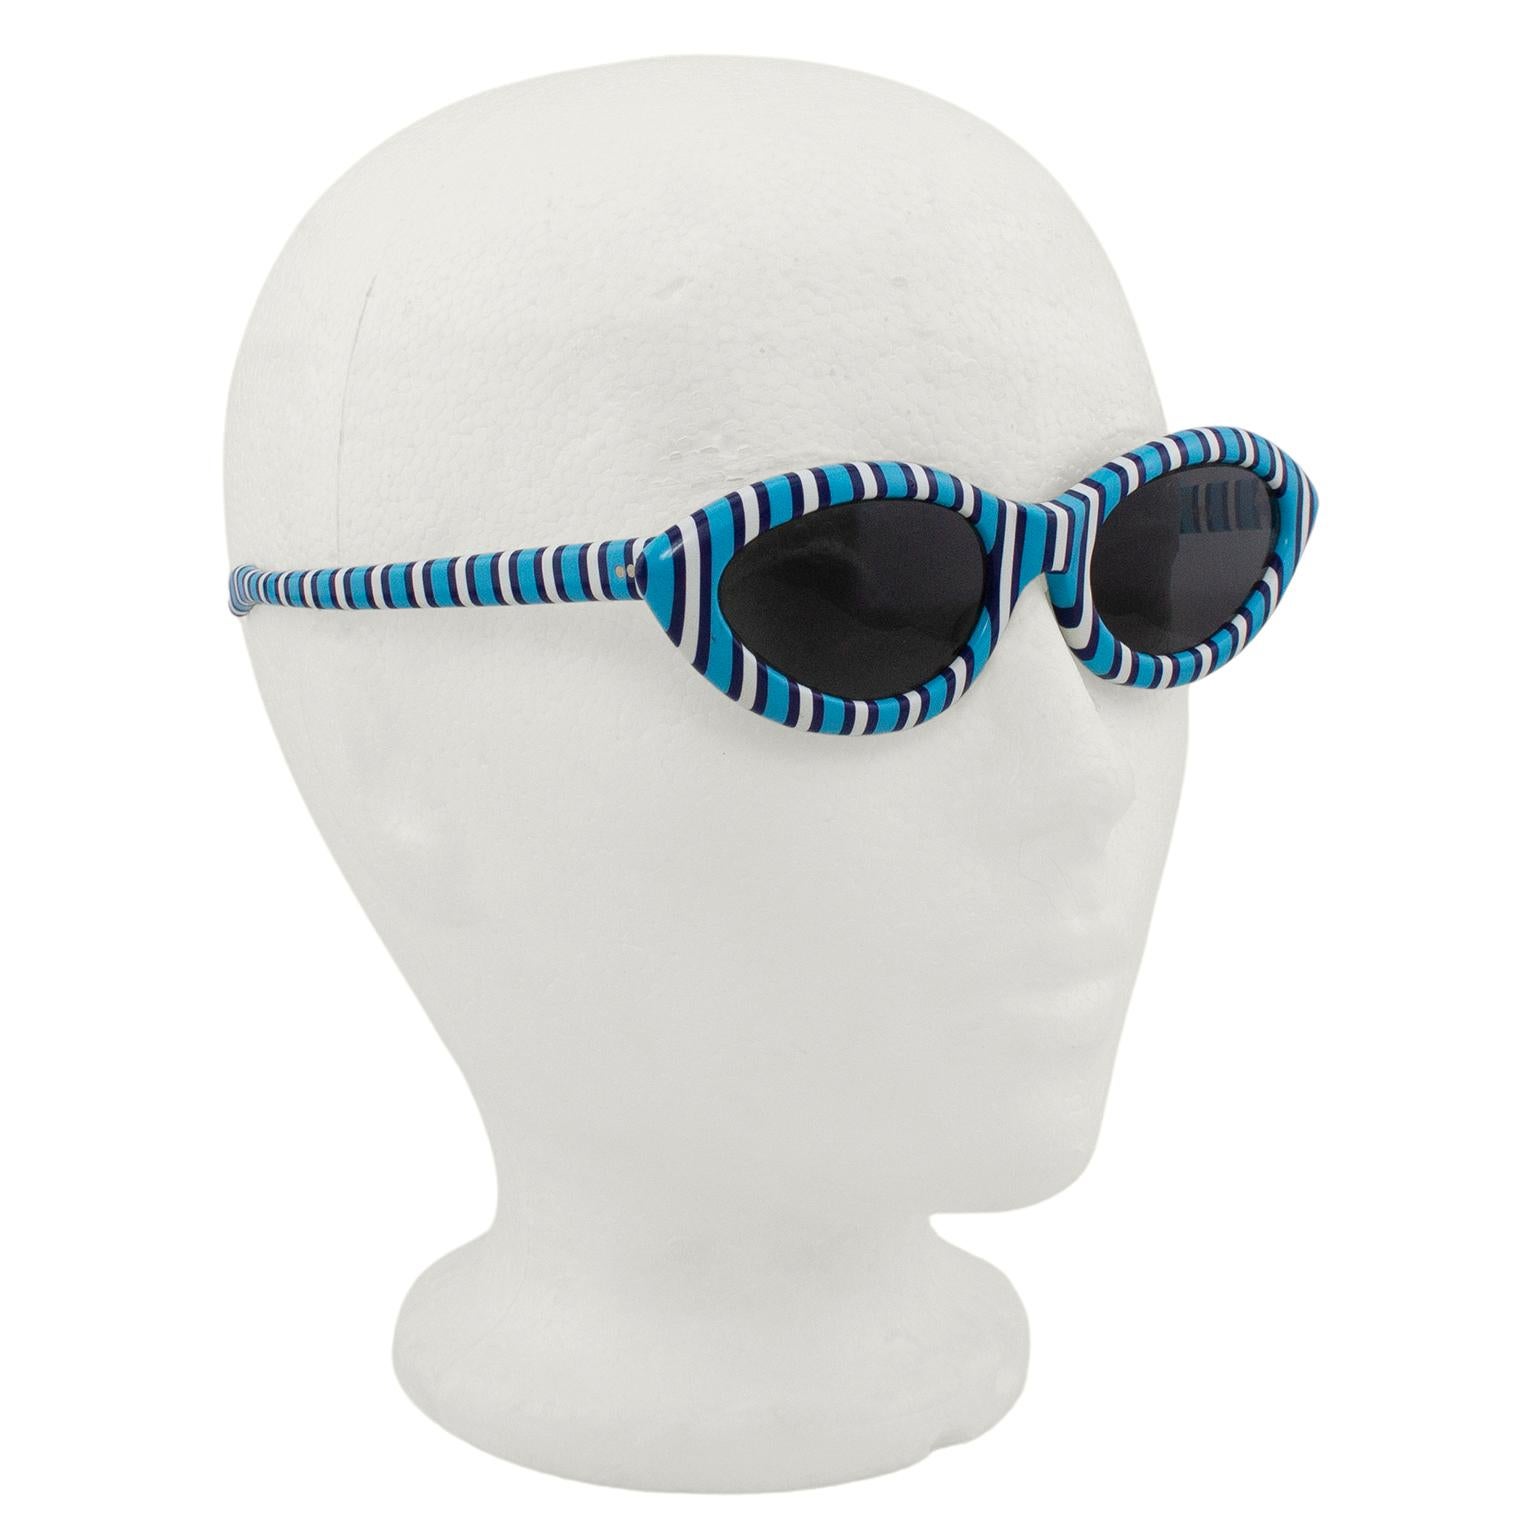 These are the perfect sunglasses for a whirlwind European vacation! Cerulean, navy blue and white vertical stripe cat eye sunglasses by Trifari, best known for manufacturing decades of fabulous costume jewelry. Based on the mod shape and style,